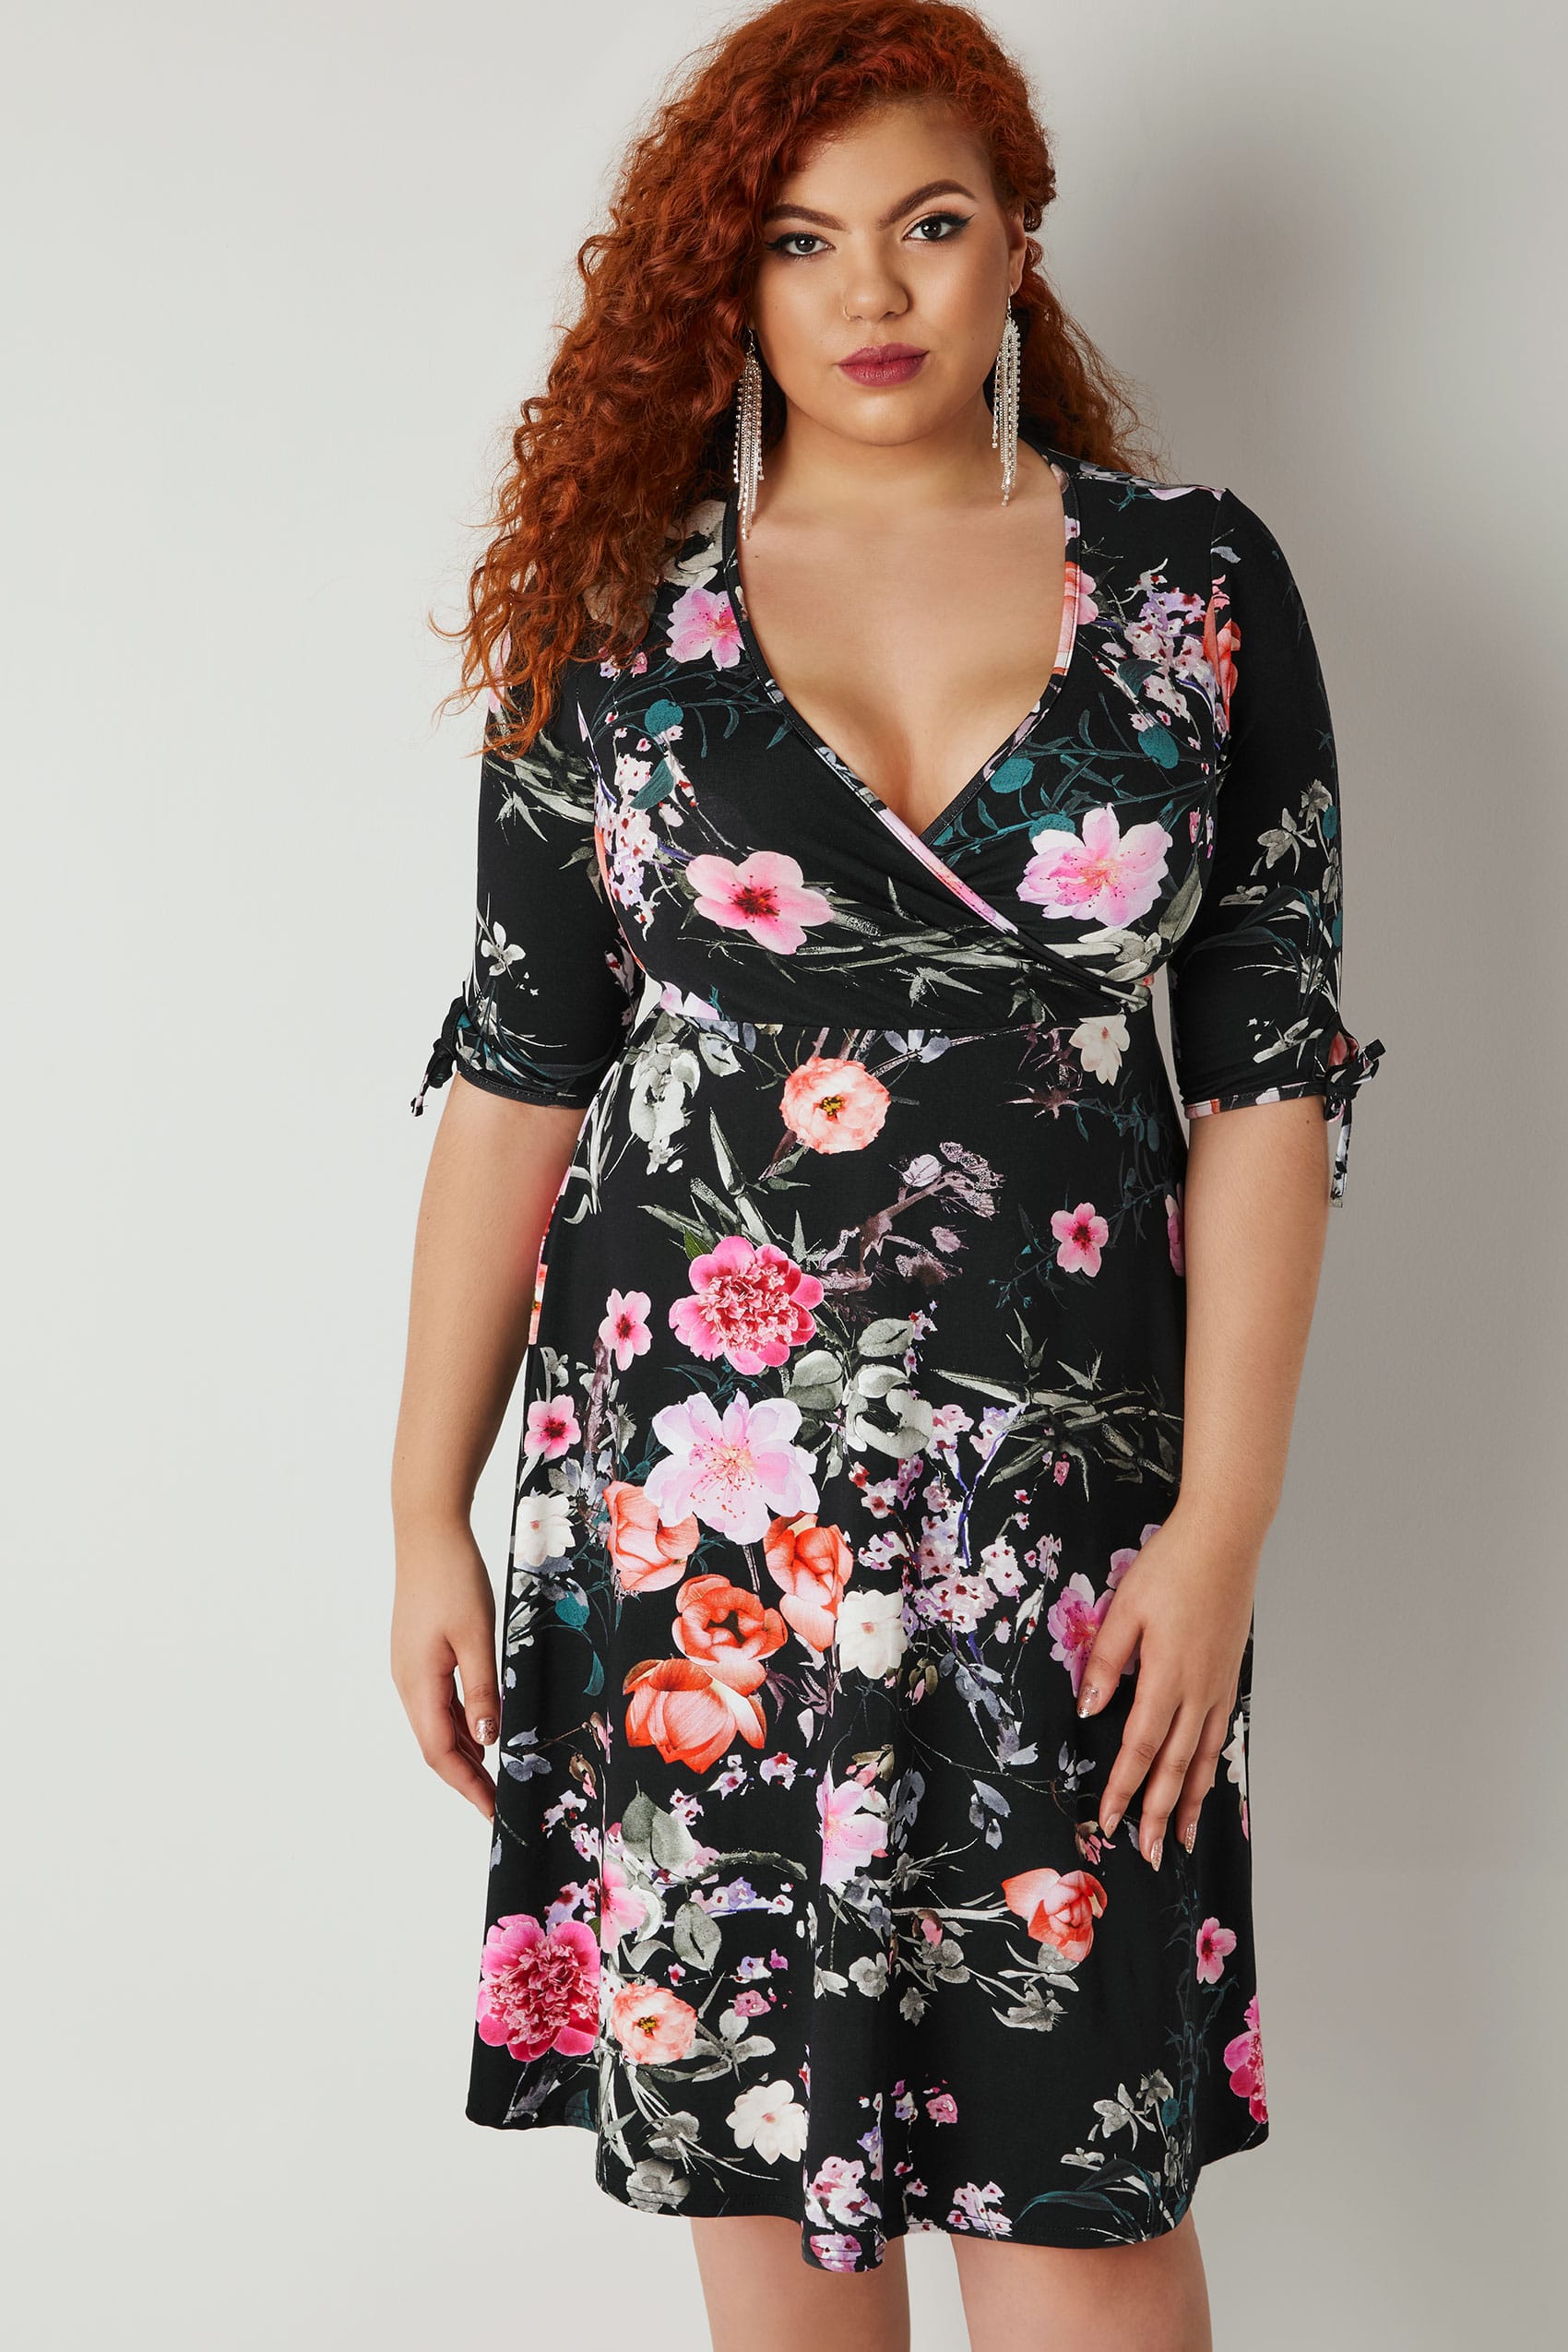 YOURS LONDON Black Floral Wrap Dress With Tie Sleeves, Plus size 16 to 32